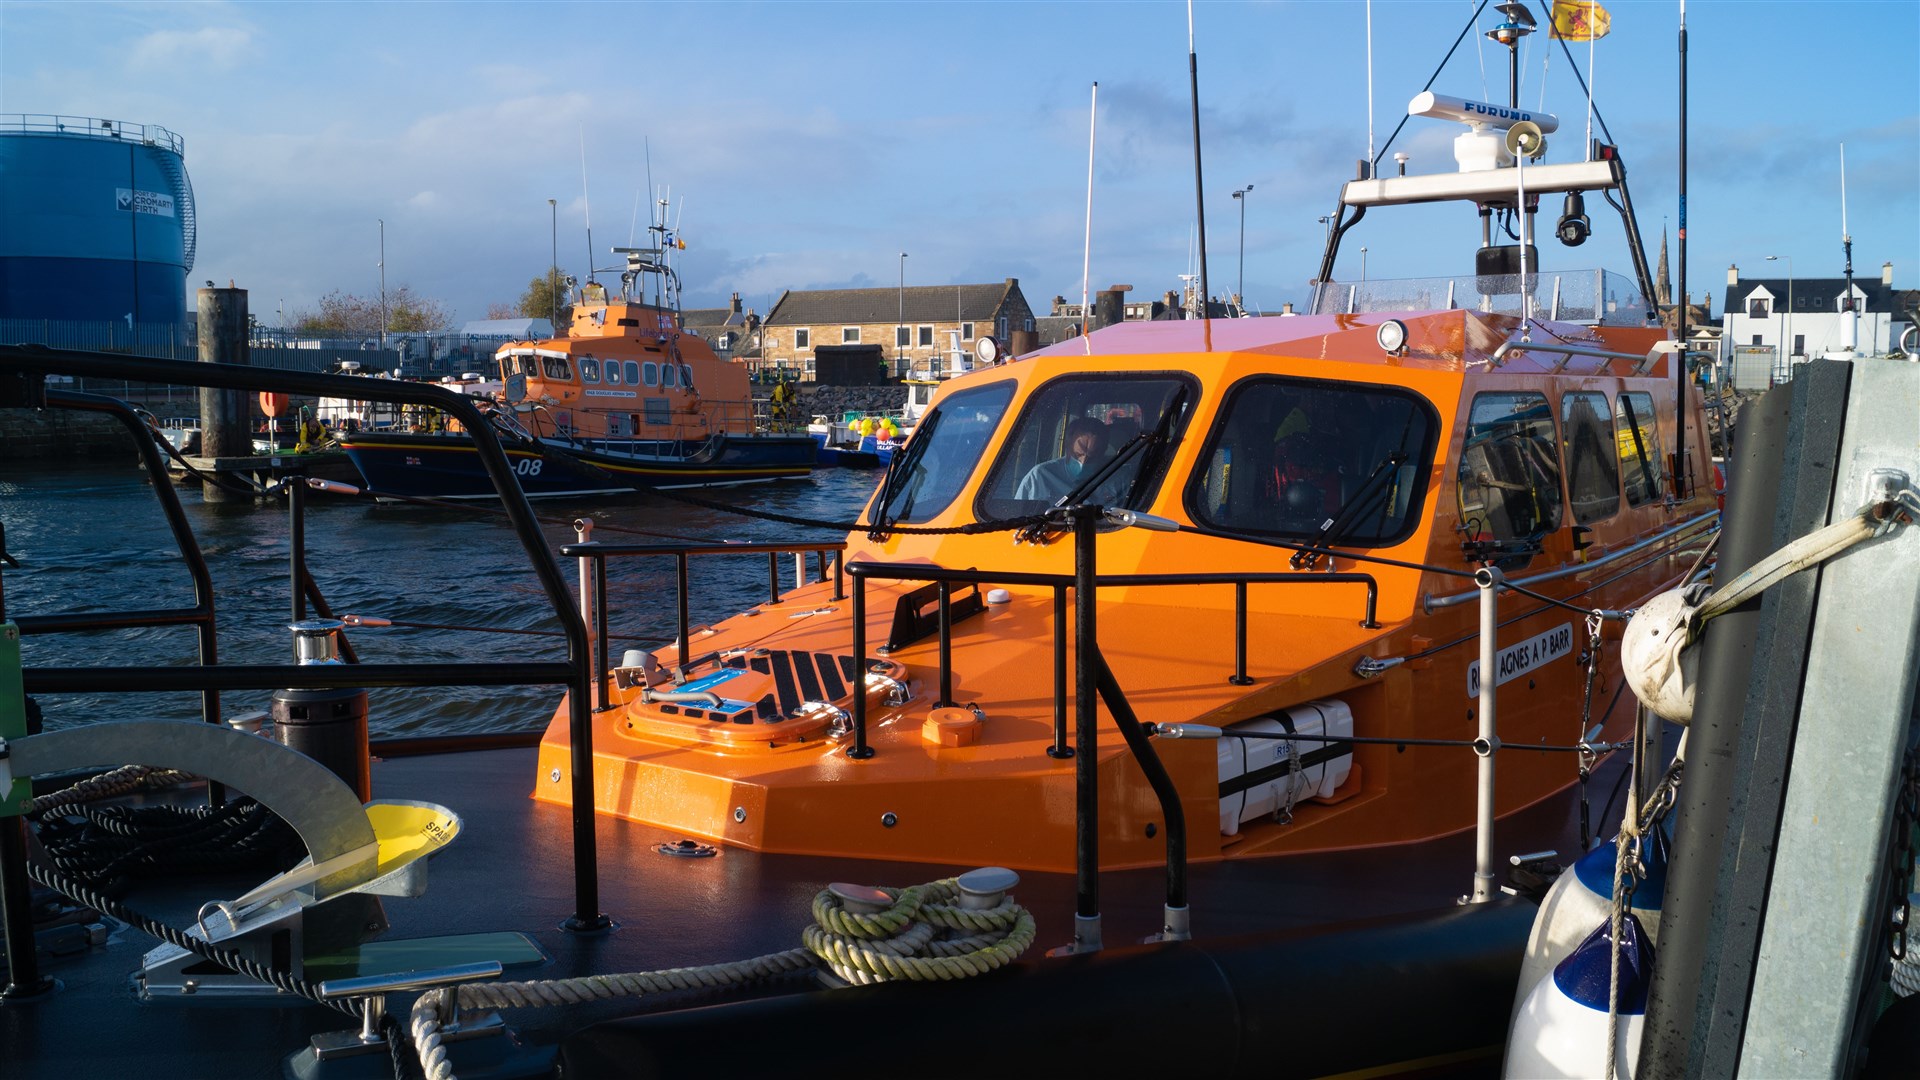 The new lifeboat. Picture: RNLI/Michael MacDonald.